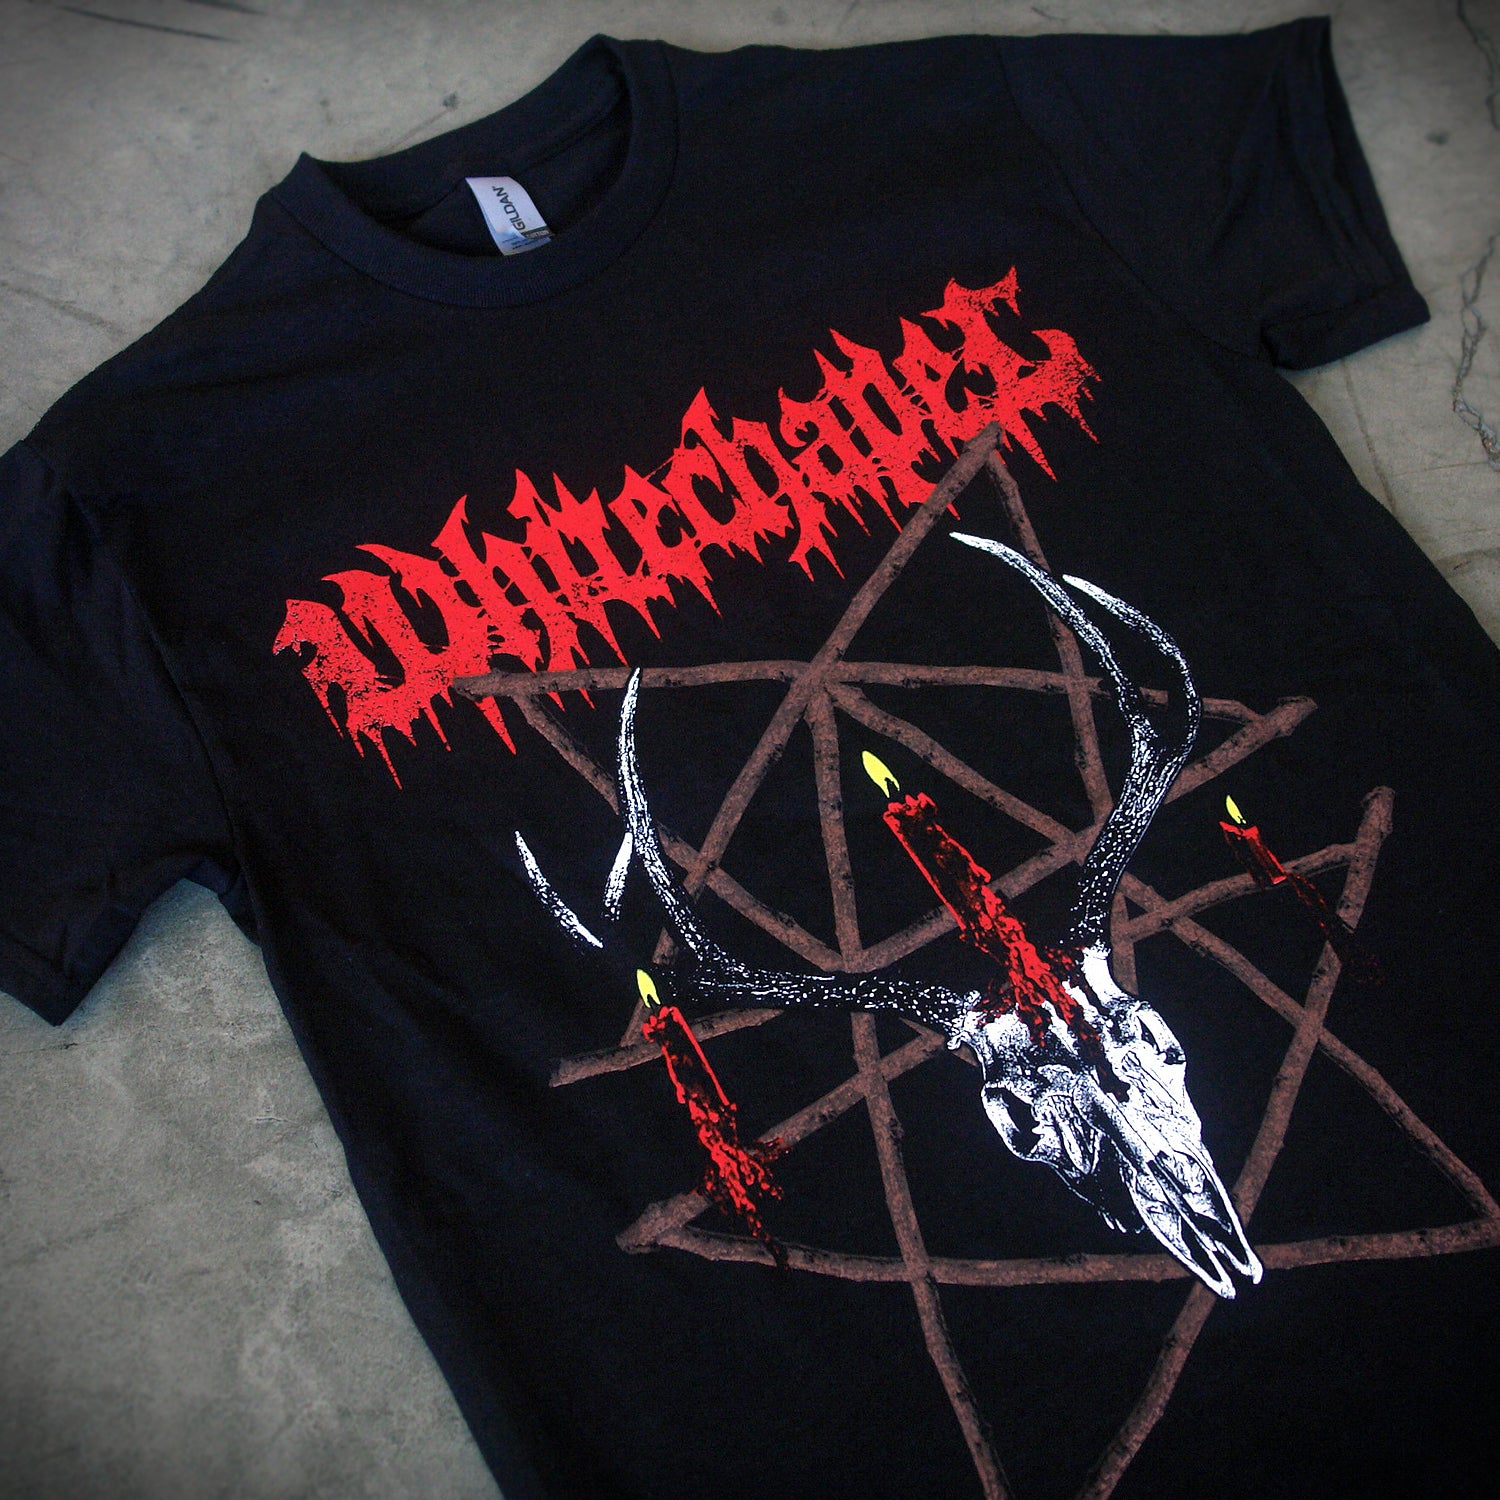 close up, angled image of a black tee shirt laid flat on a concrete floor. front of tee has full body print. at the top in red says whitechapel. below is a deer skull with a burning candle and a pentagram made out of sticks.